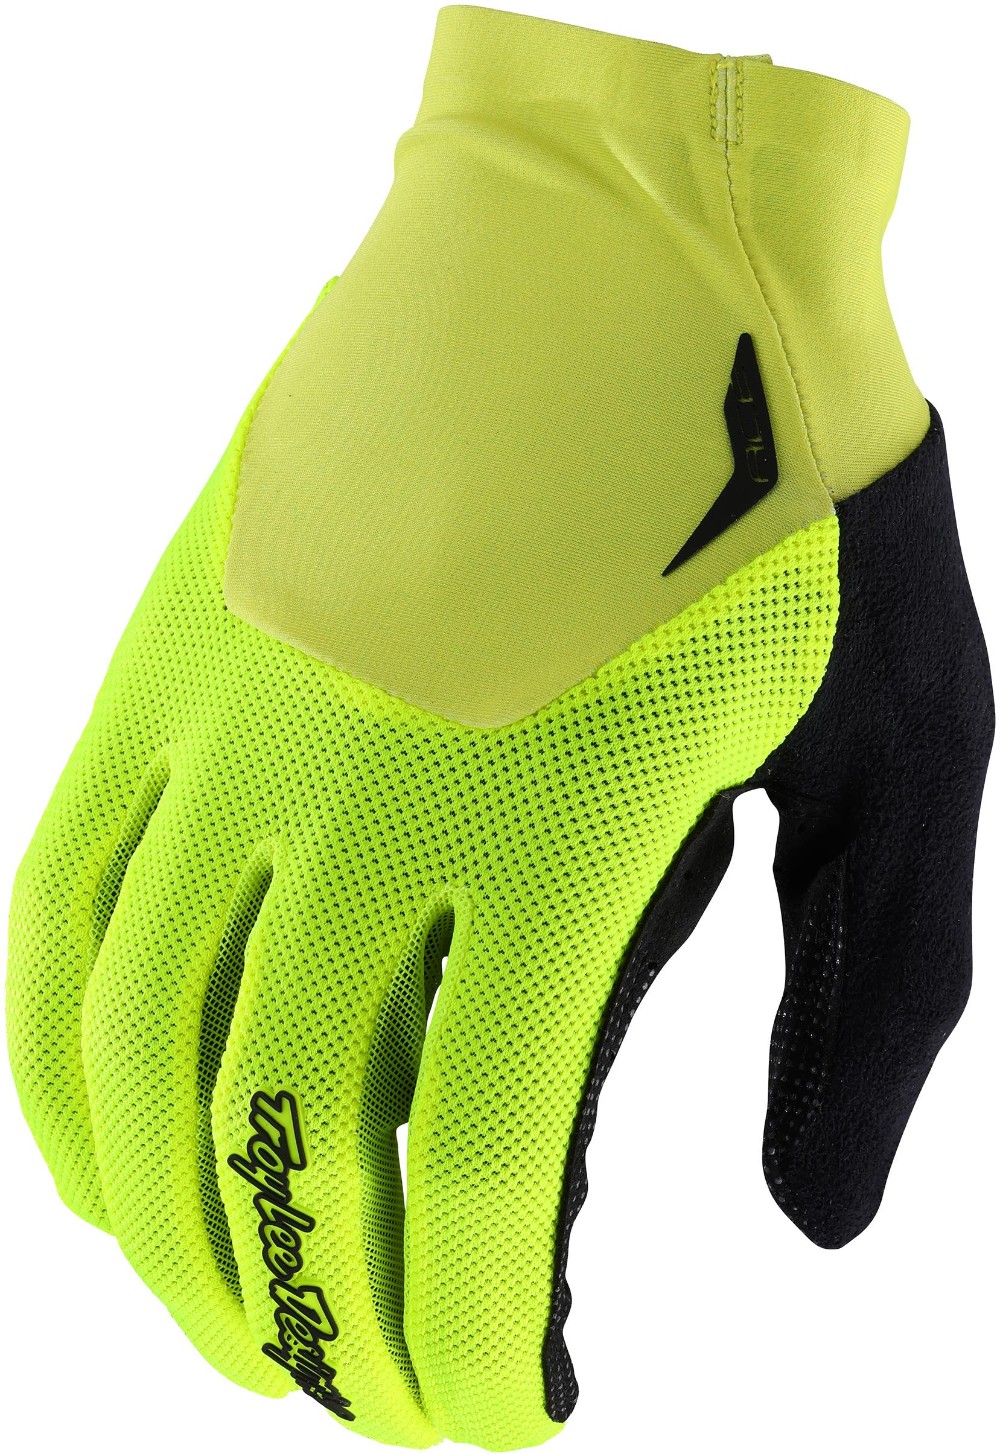 Ace Long Finger Cycling Gloves image 0